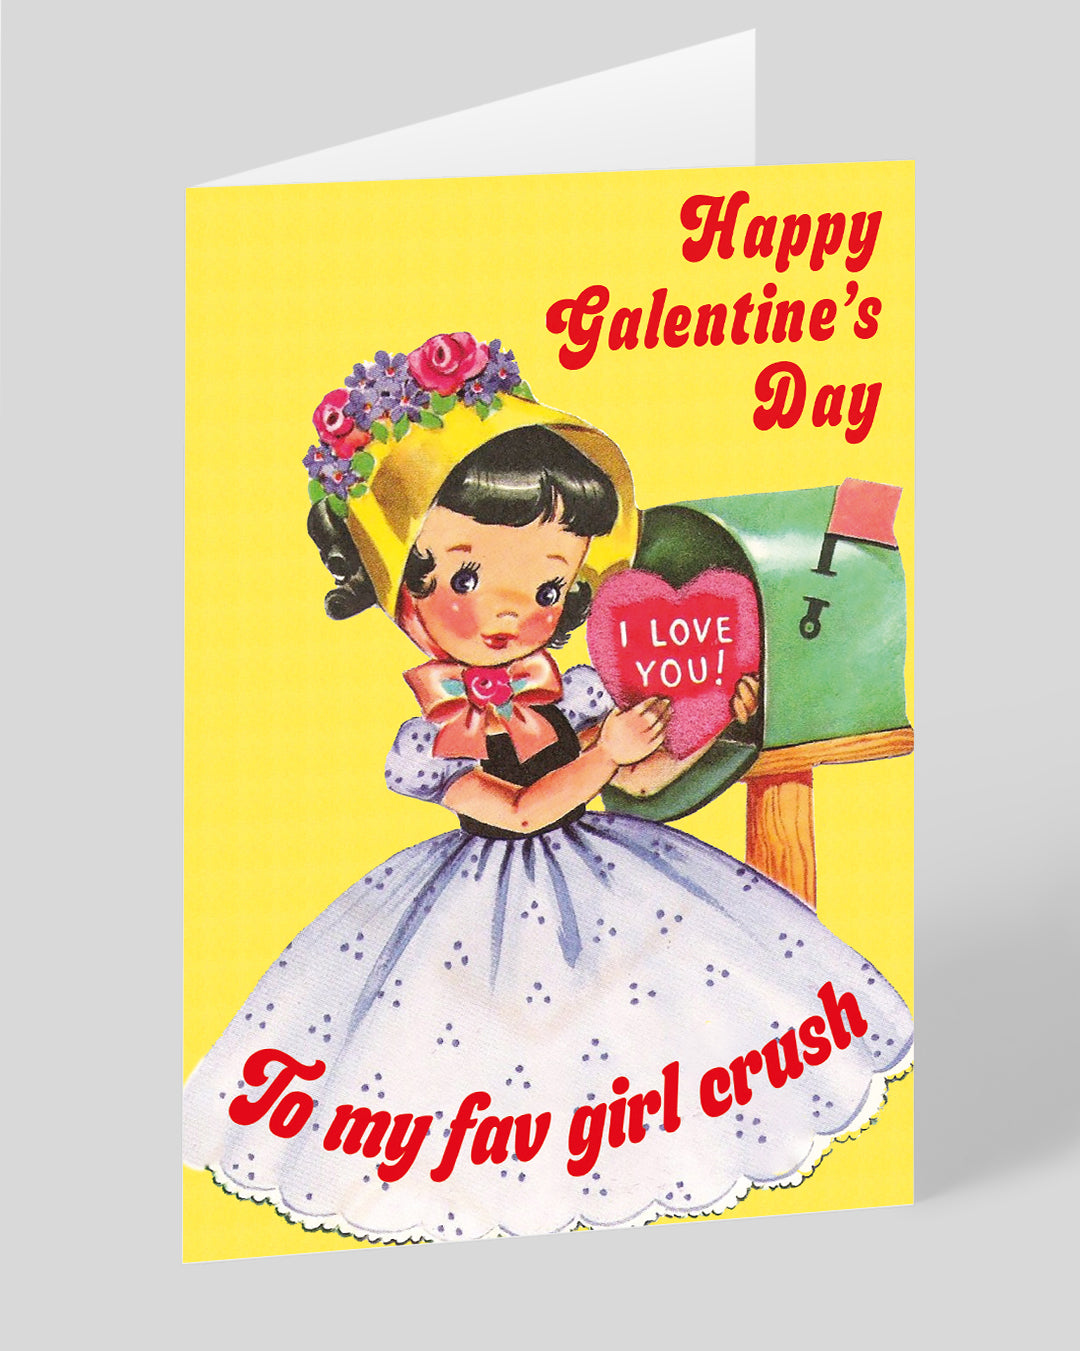 Valentine’s Day | Valentines Card For Him or Her | Personalised Happy Galentine’s Day Card | Ohh Deer Unique Valentine’s Card | Artwork by Smitten Kitten | Made In The UK, Eco-Friendly Materials, Plastic Free Packaging